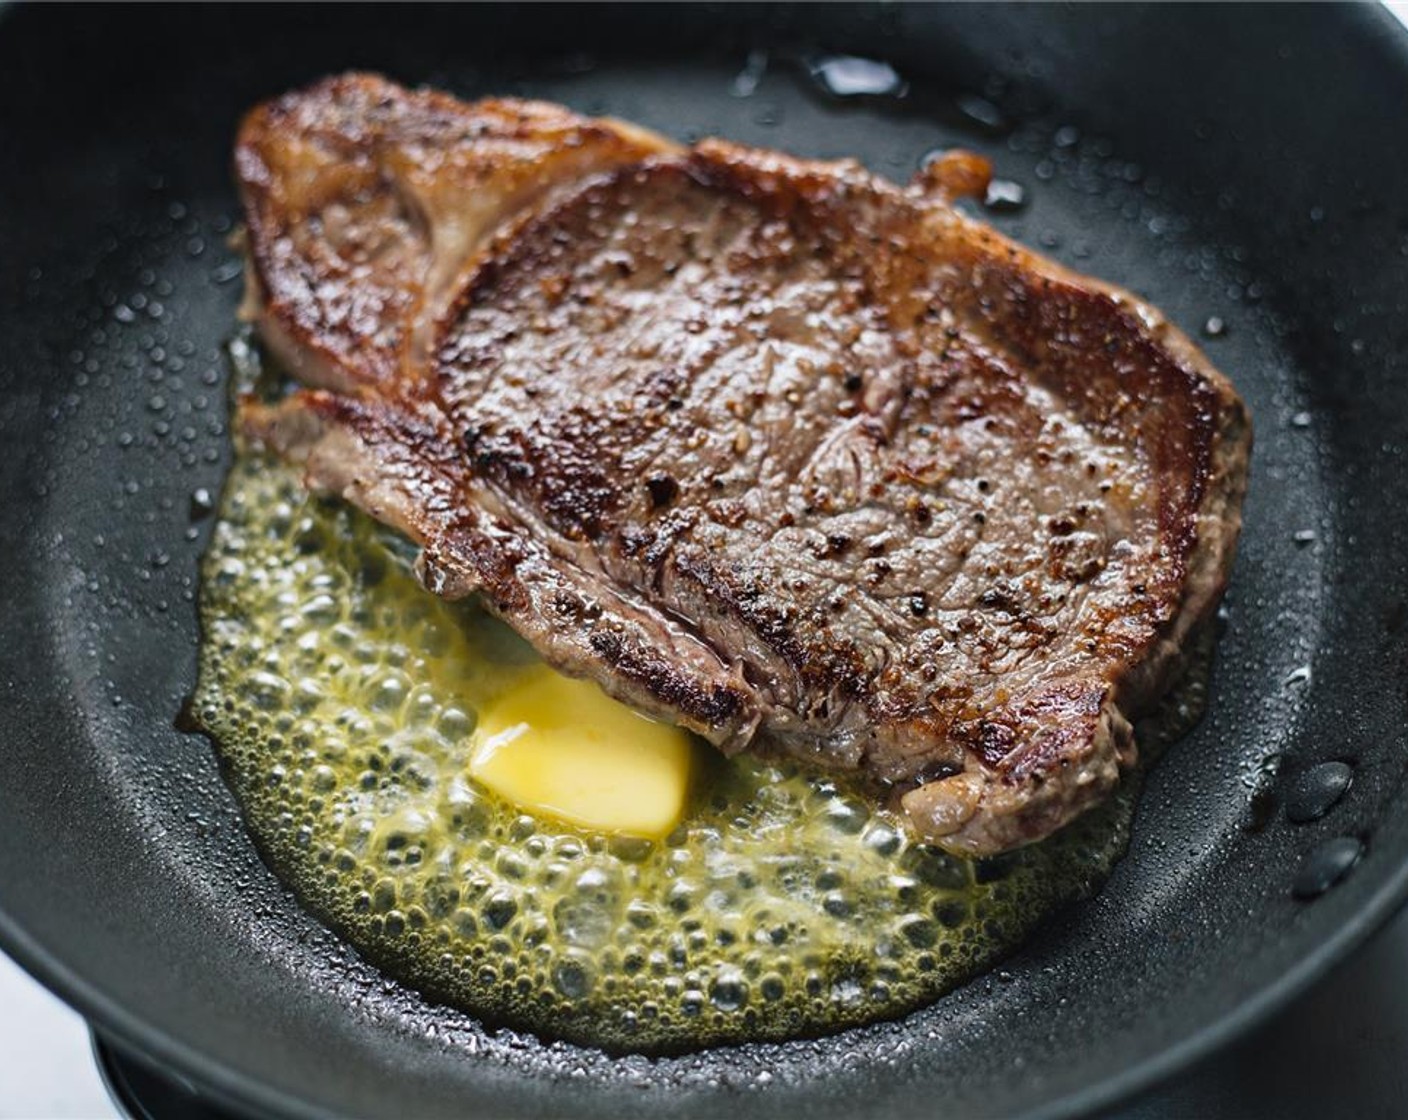 step 7 To finish off steak, place Unsalted Butter (1 Tbsp) in the pan, and let melt.